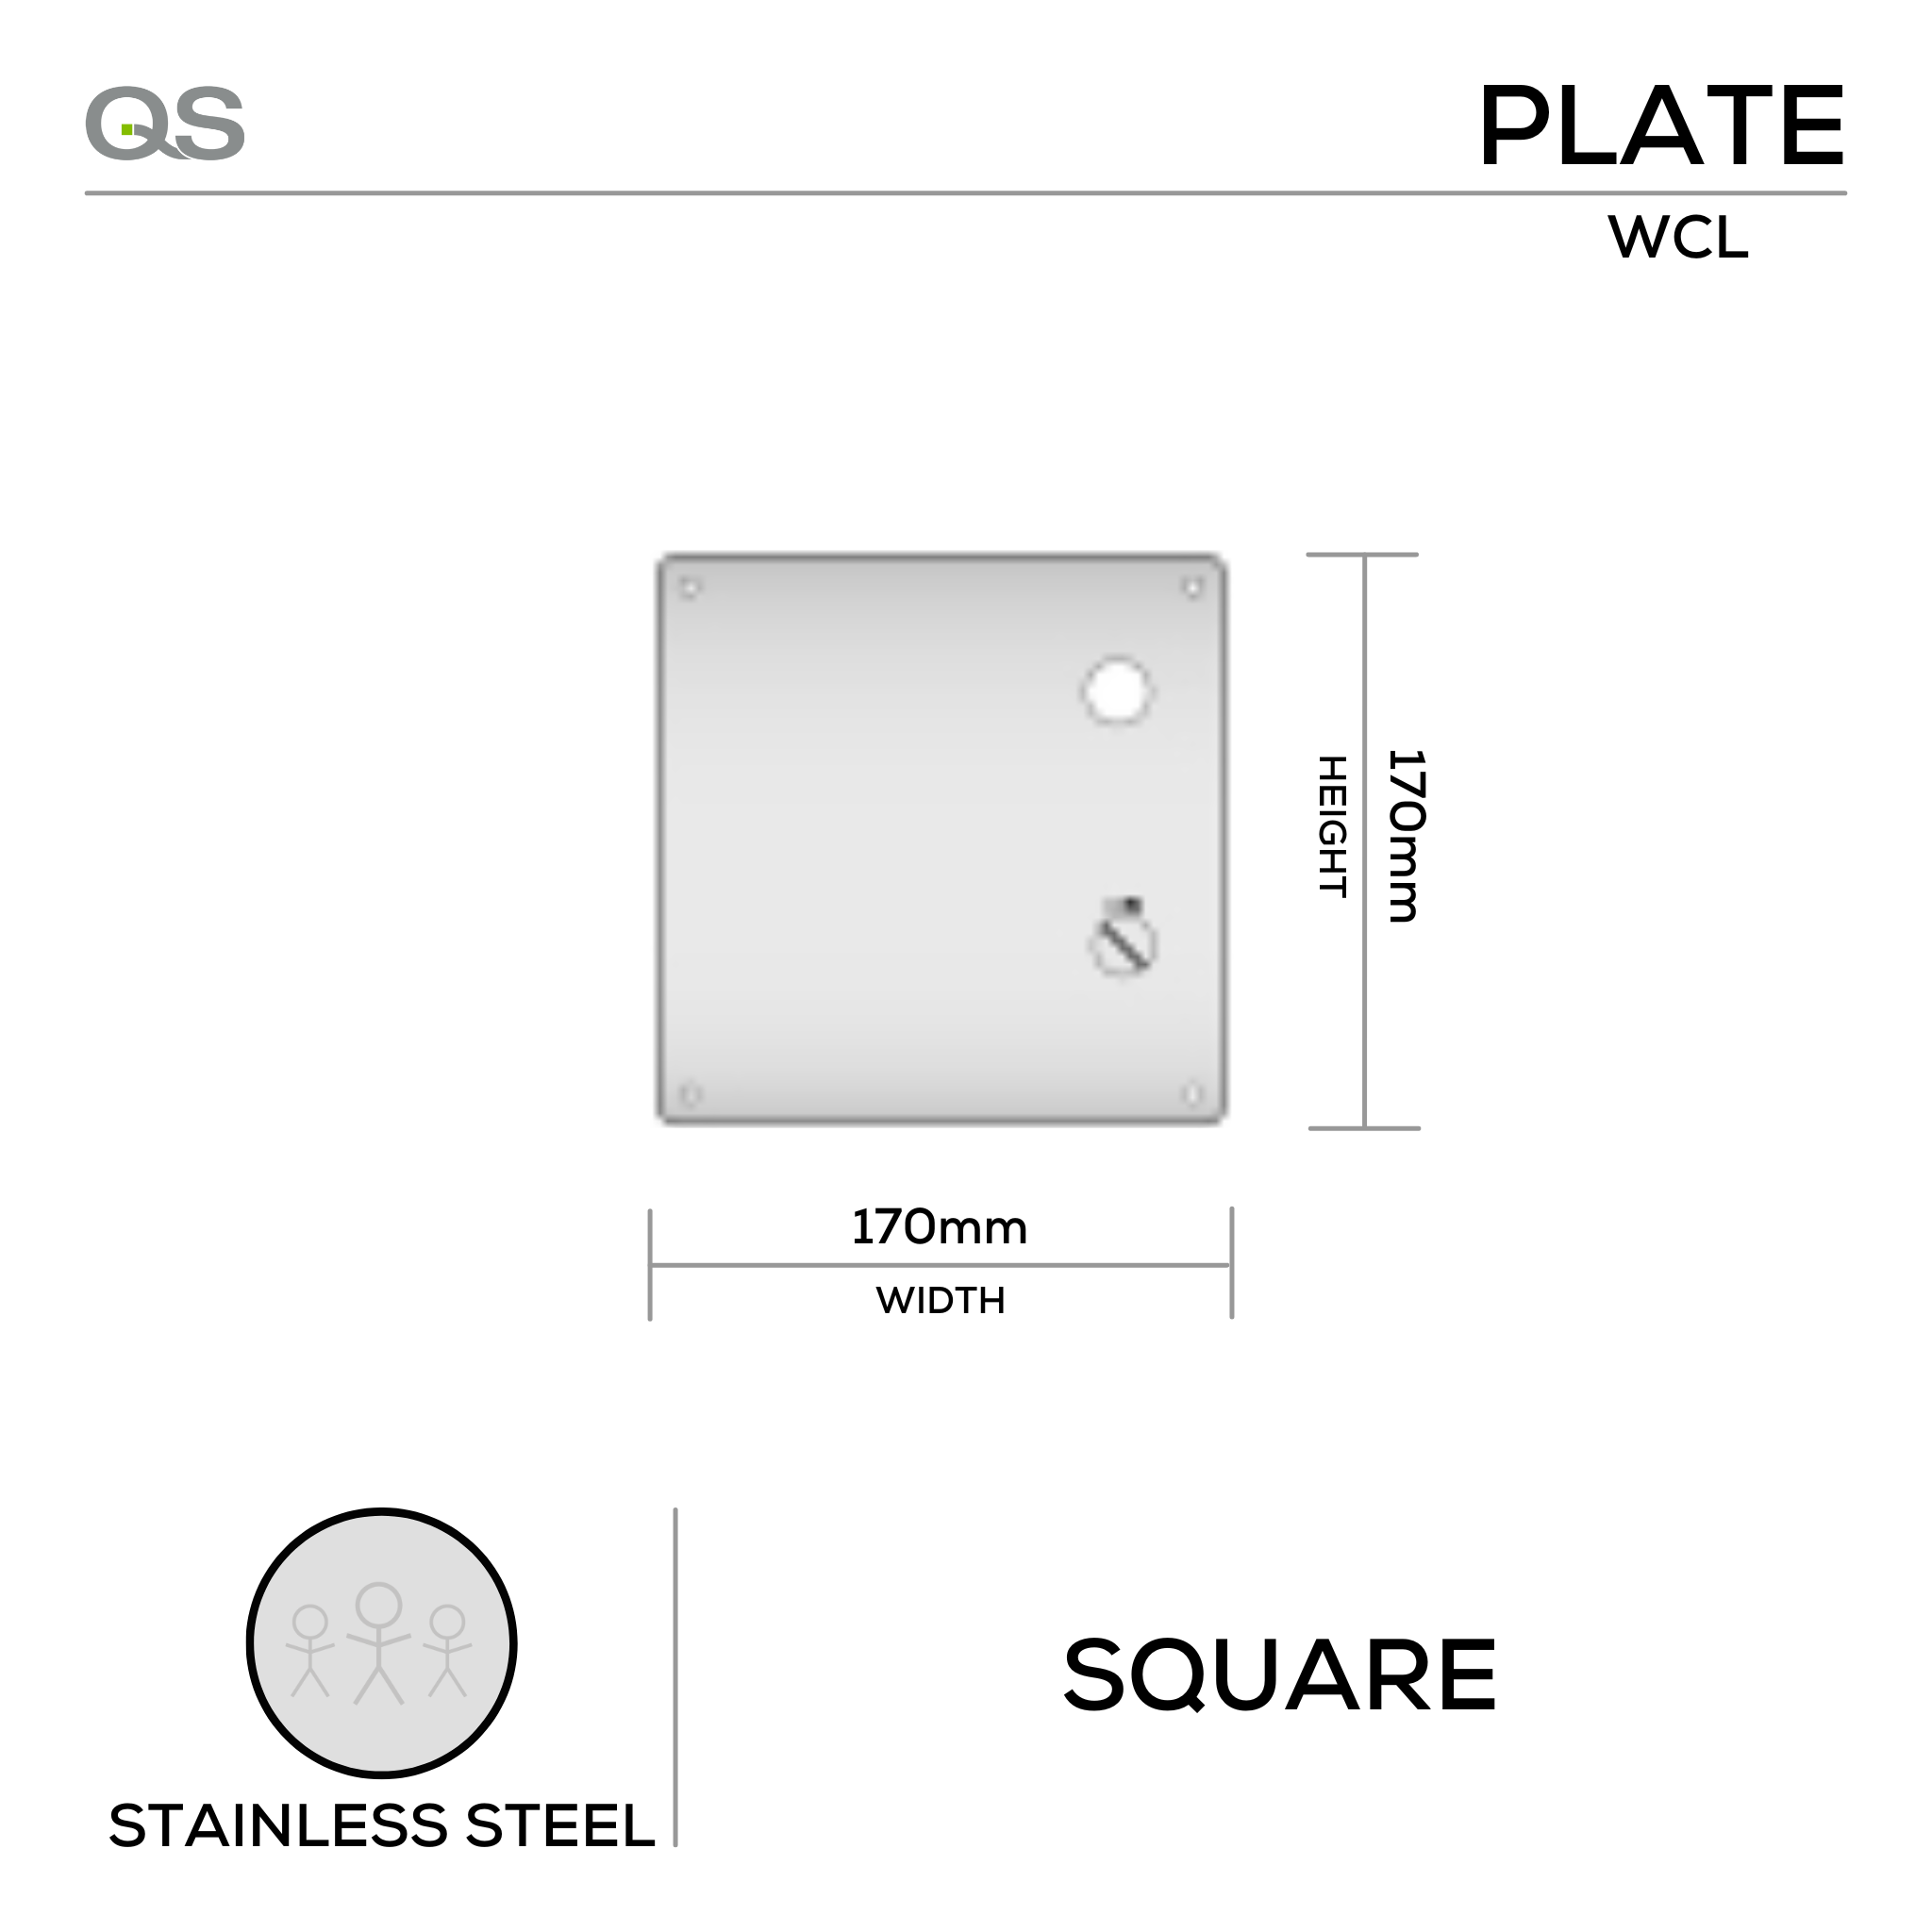 QS4485 WC/L, Plate, Square, 170mm (l) x 170mm (w), (Price if purchasing a Qs handle at same time), Stainless Steel, QS